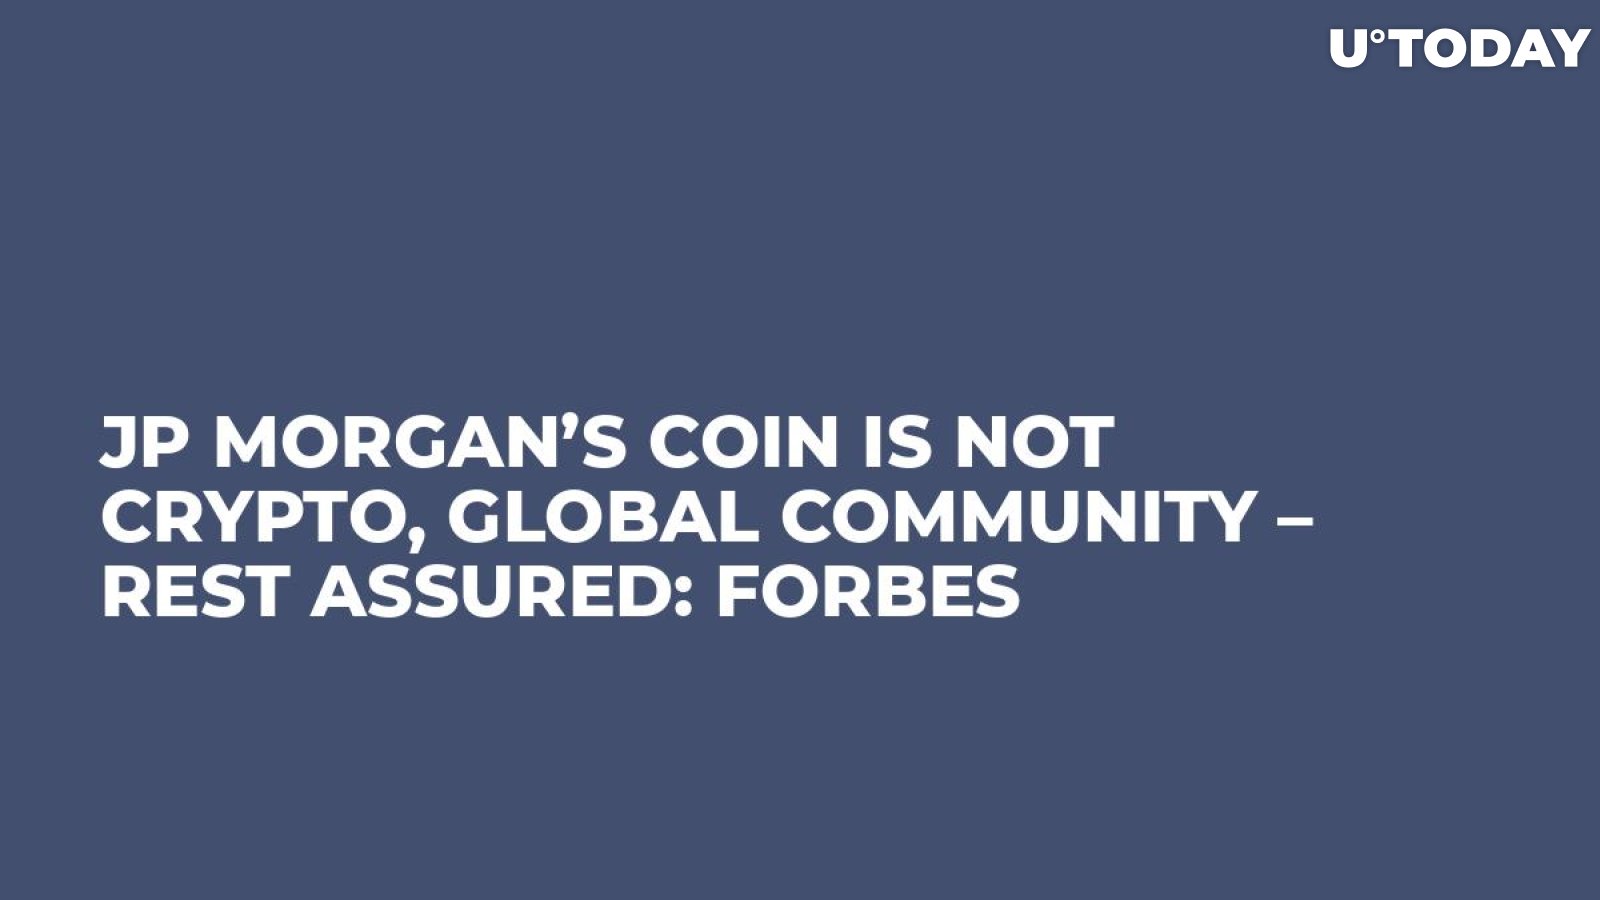 JP Morgan’s Coin is Not Crypto, Global Community – Rest Assured: Forbes